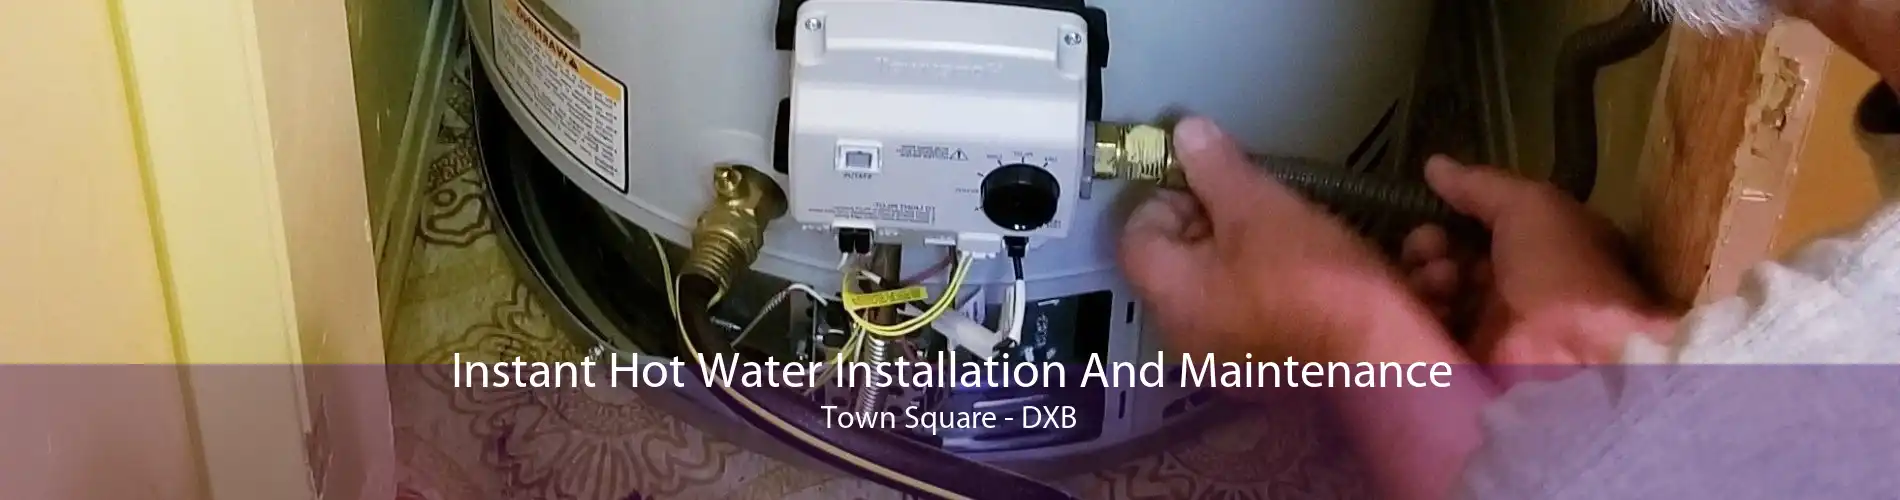 Instant Hot Water Installation And Maintenance Town Square - DXB